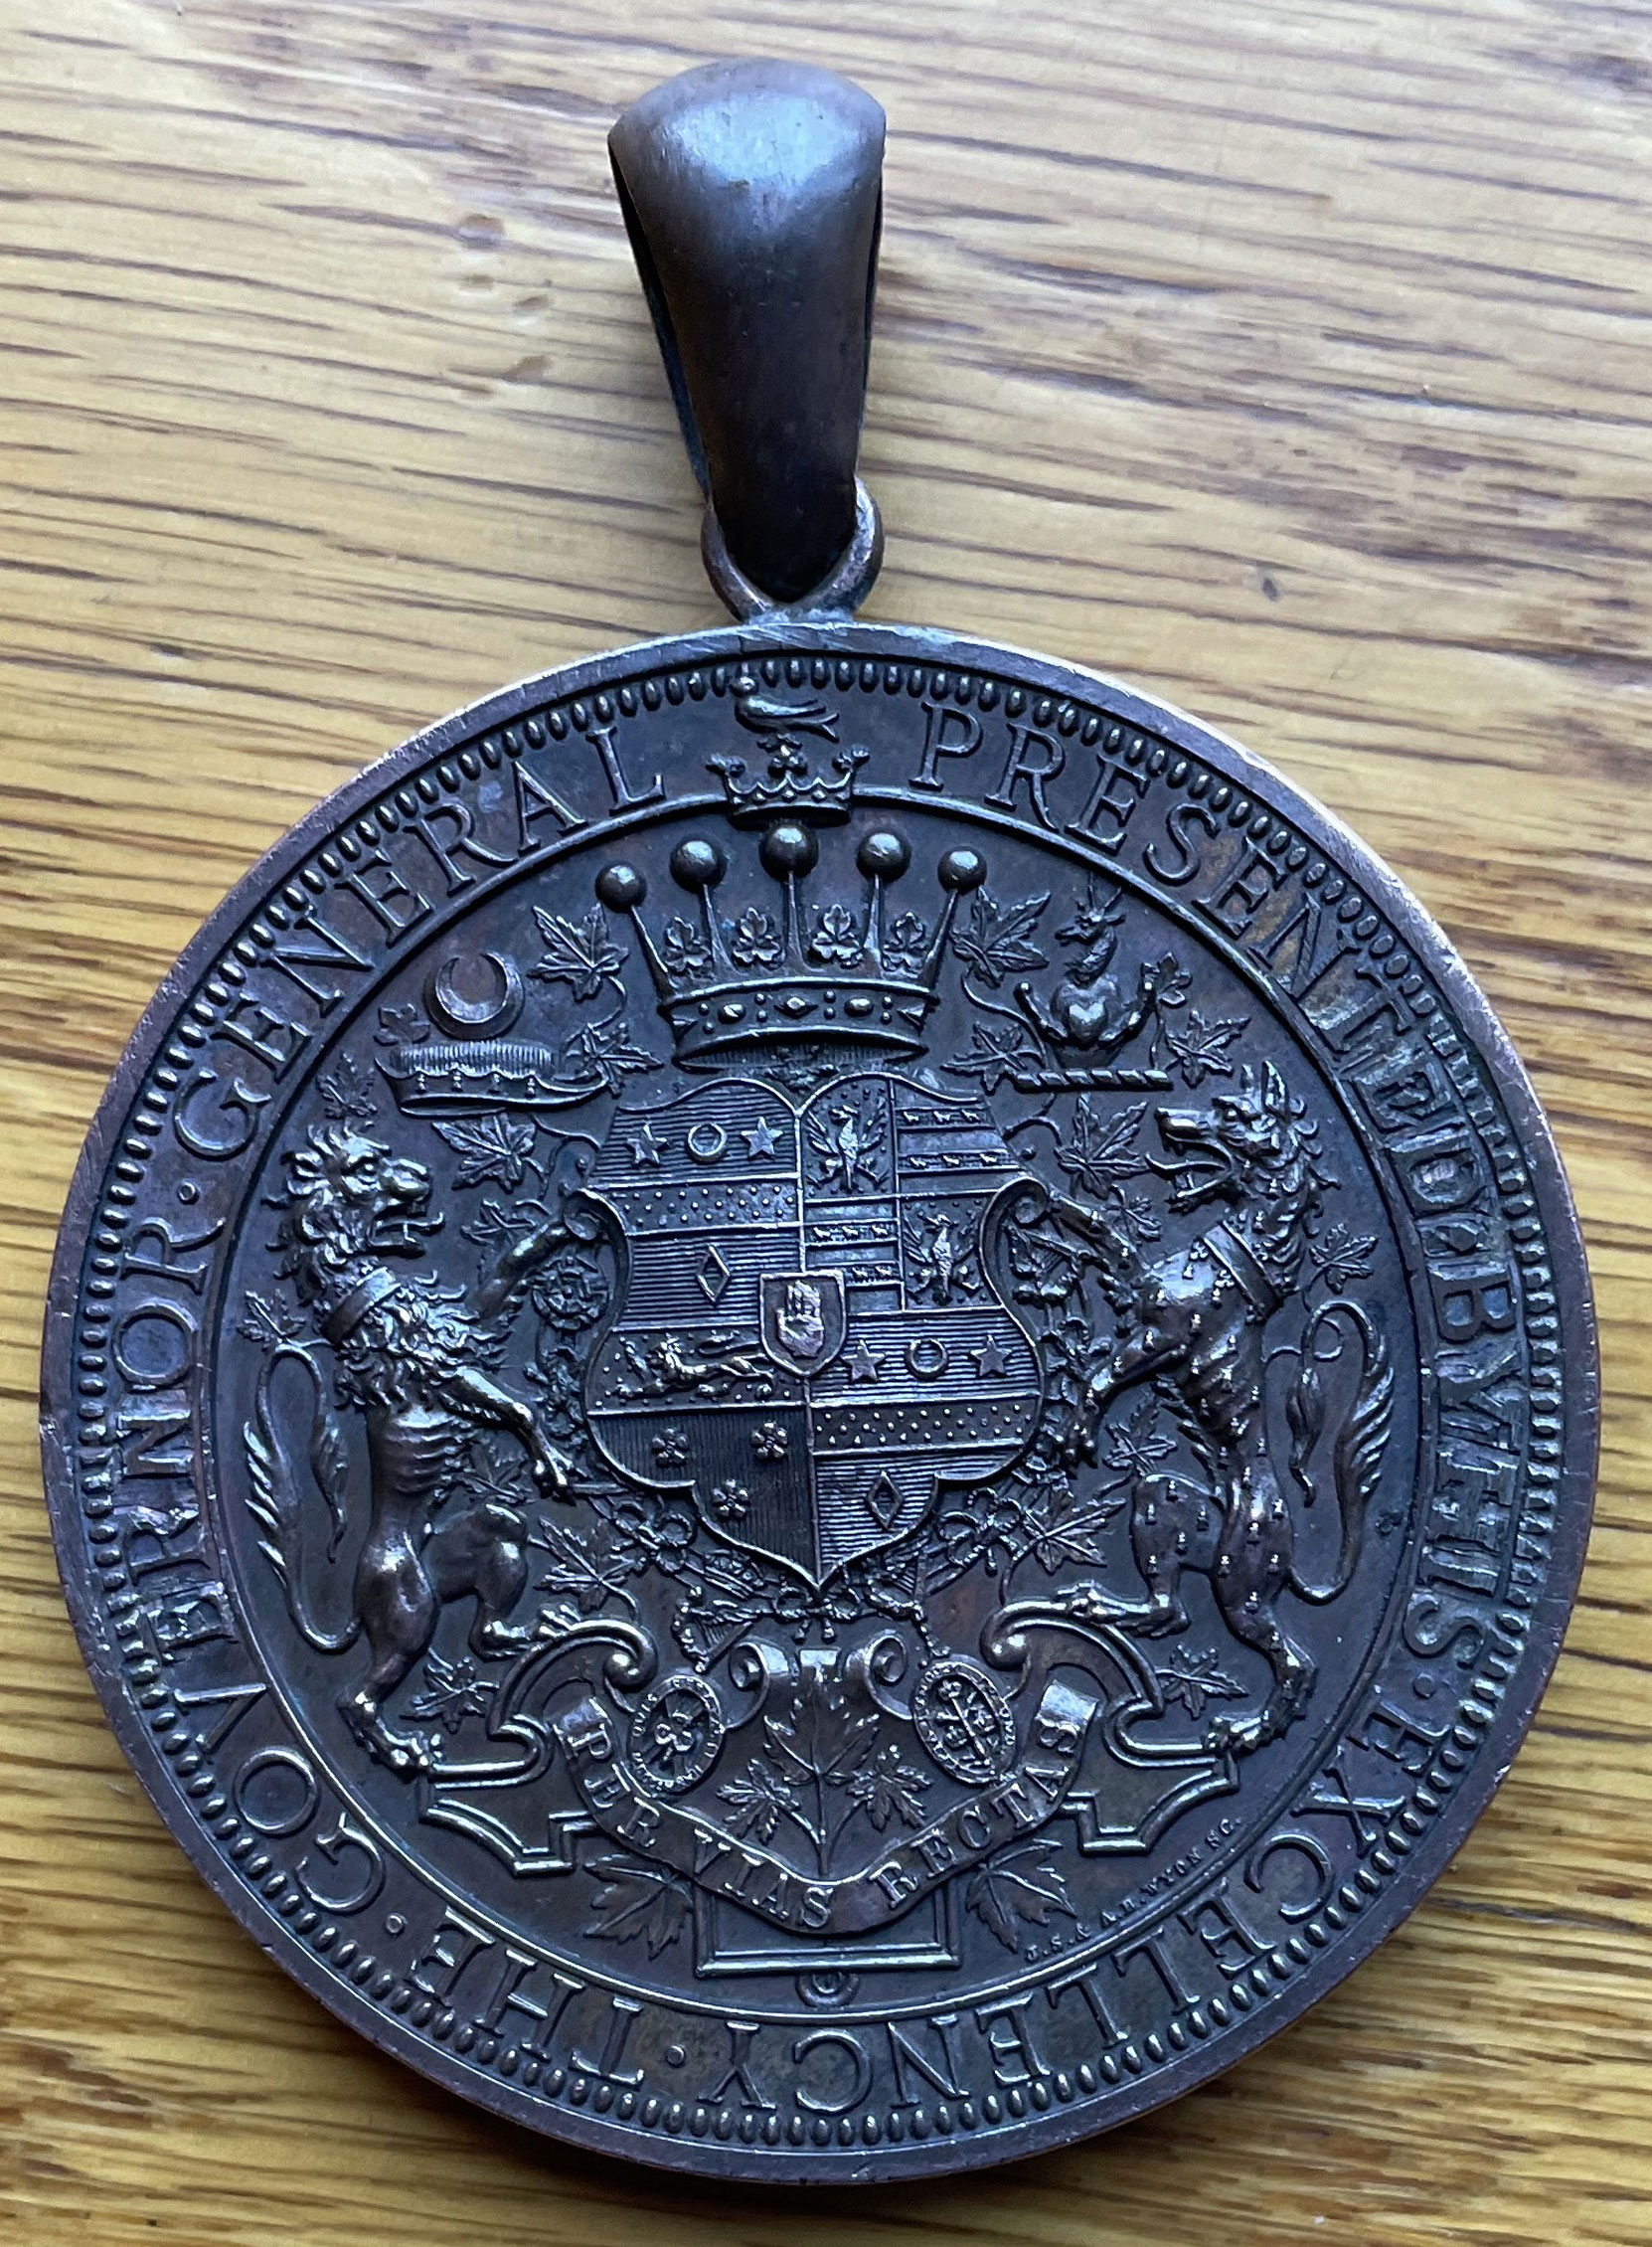 An example of the front view of the medal presented by Lord and Lady Dufferin, possibly to the Brantford Young Ladies College student who achieved the highest academic score for the school year. This particular medal was presented to Miss Nora V. Wallace of Brantford, Ontario in 1878. (Courtesy of David Pease - private collection, used with permission)